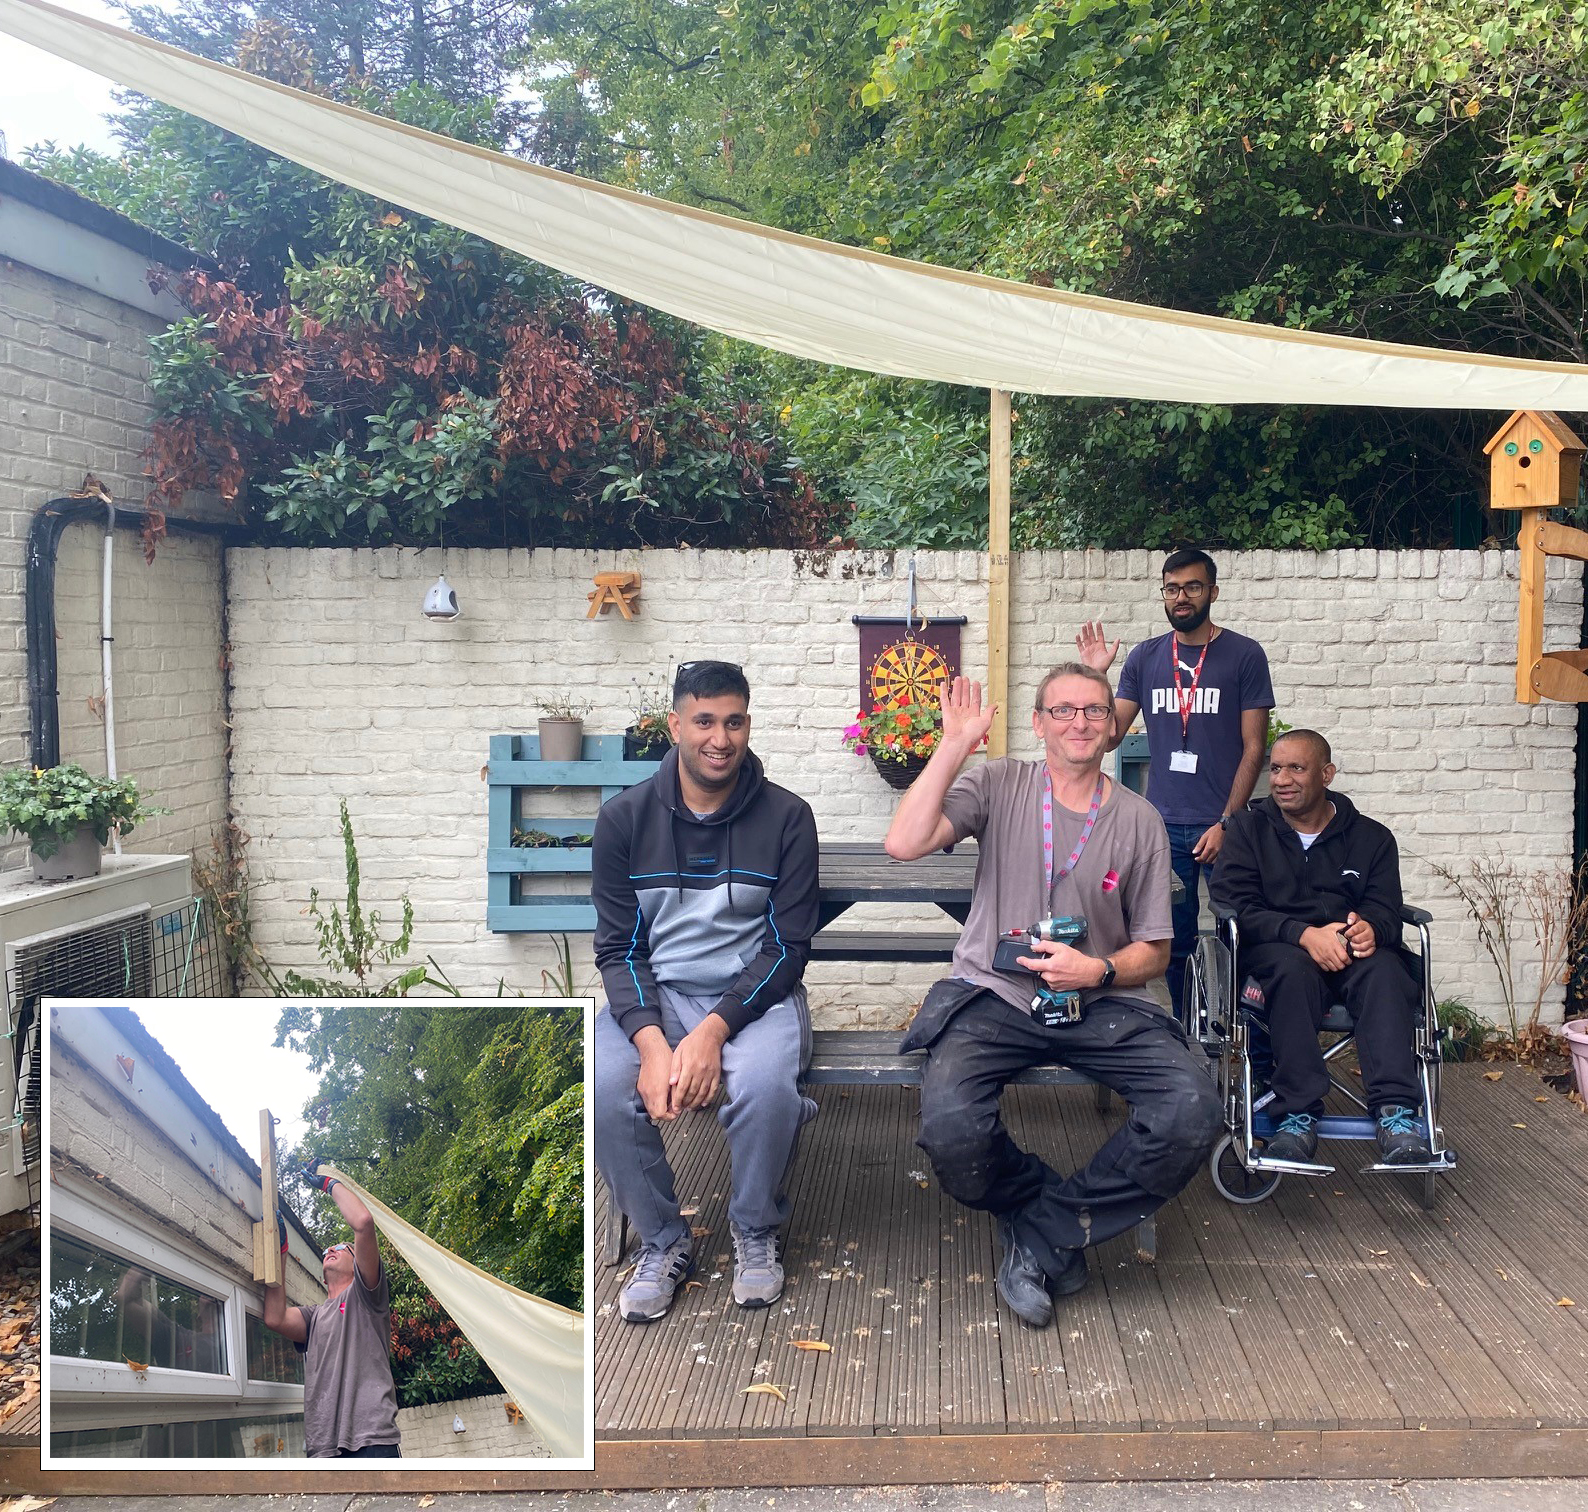 Parvaaz service users enjoying their decking with the new sun sail. Installed by OPSL opperatives